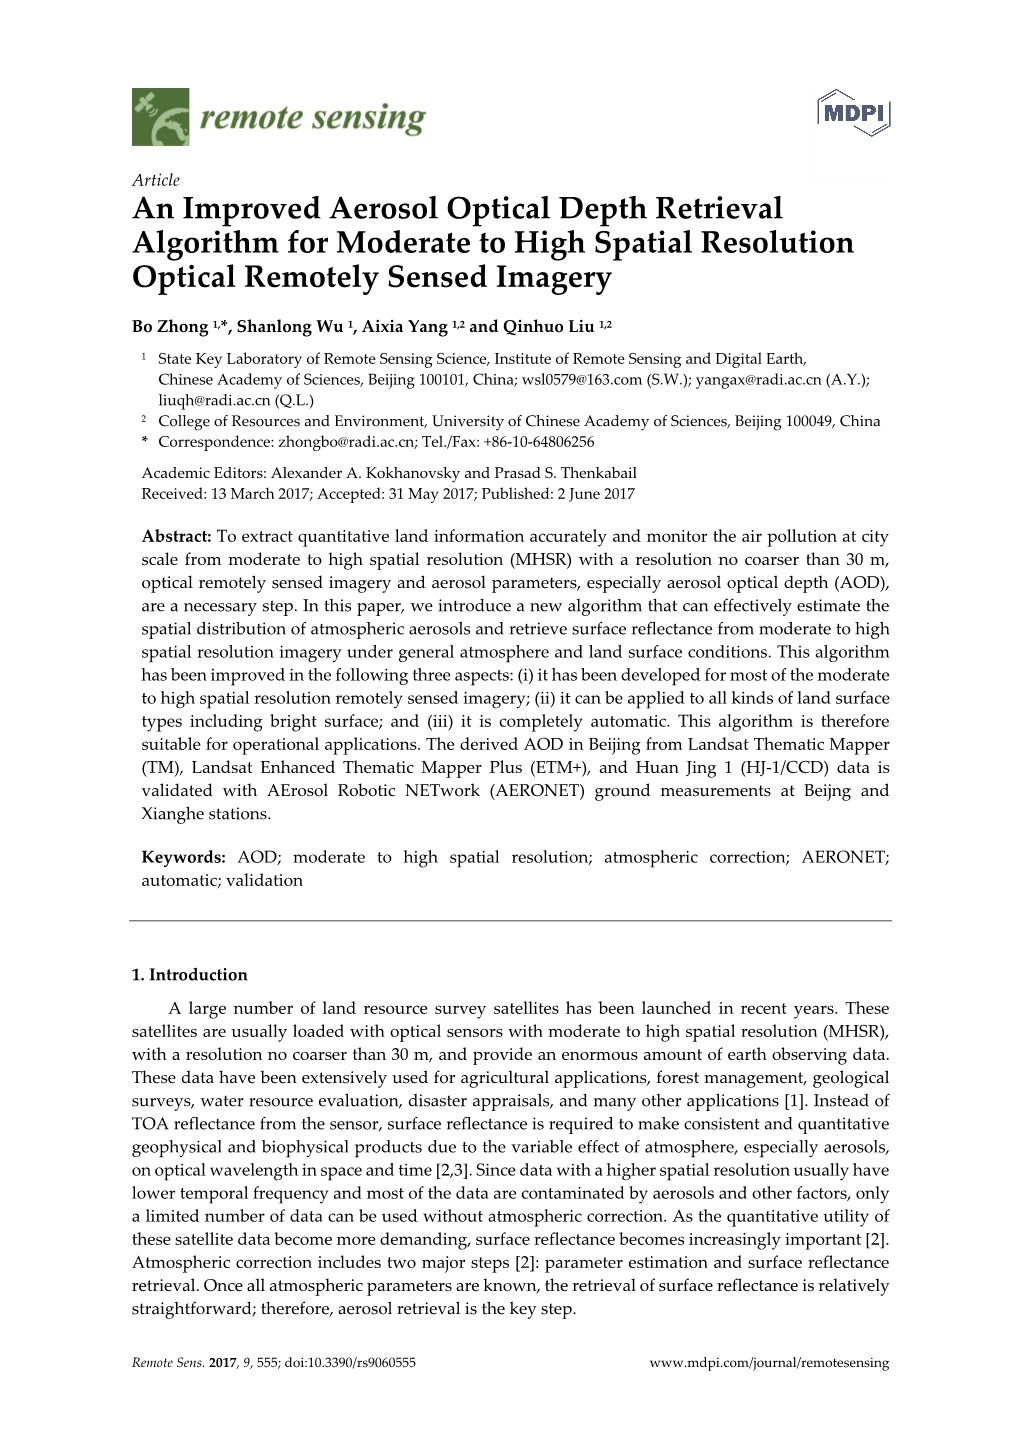 An Improved Aerosol Optical Depth Retrieval Algorithm for Moderate to High Spatial Resolution Optical Remotely Sensed Imagery